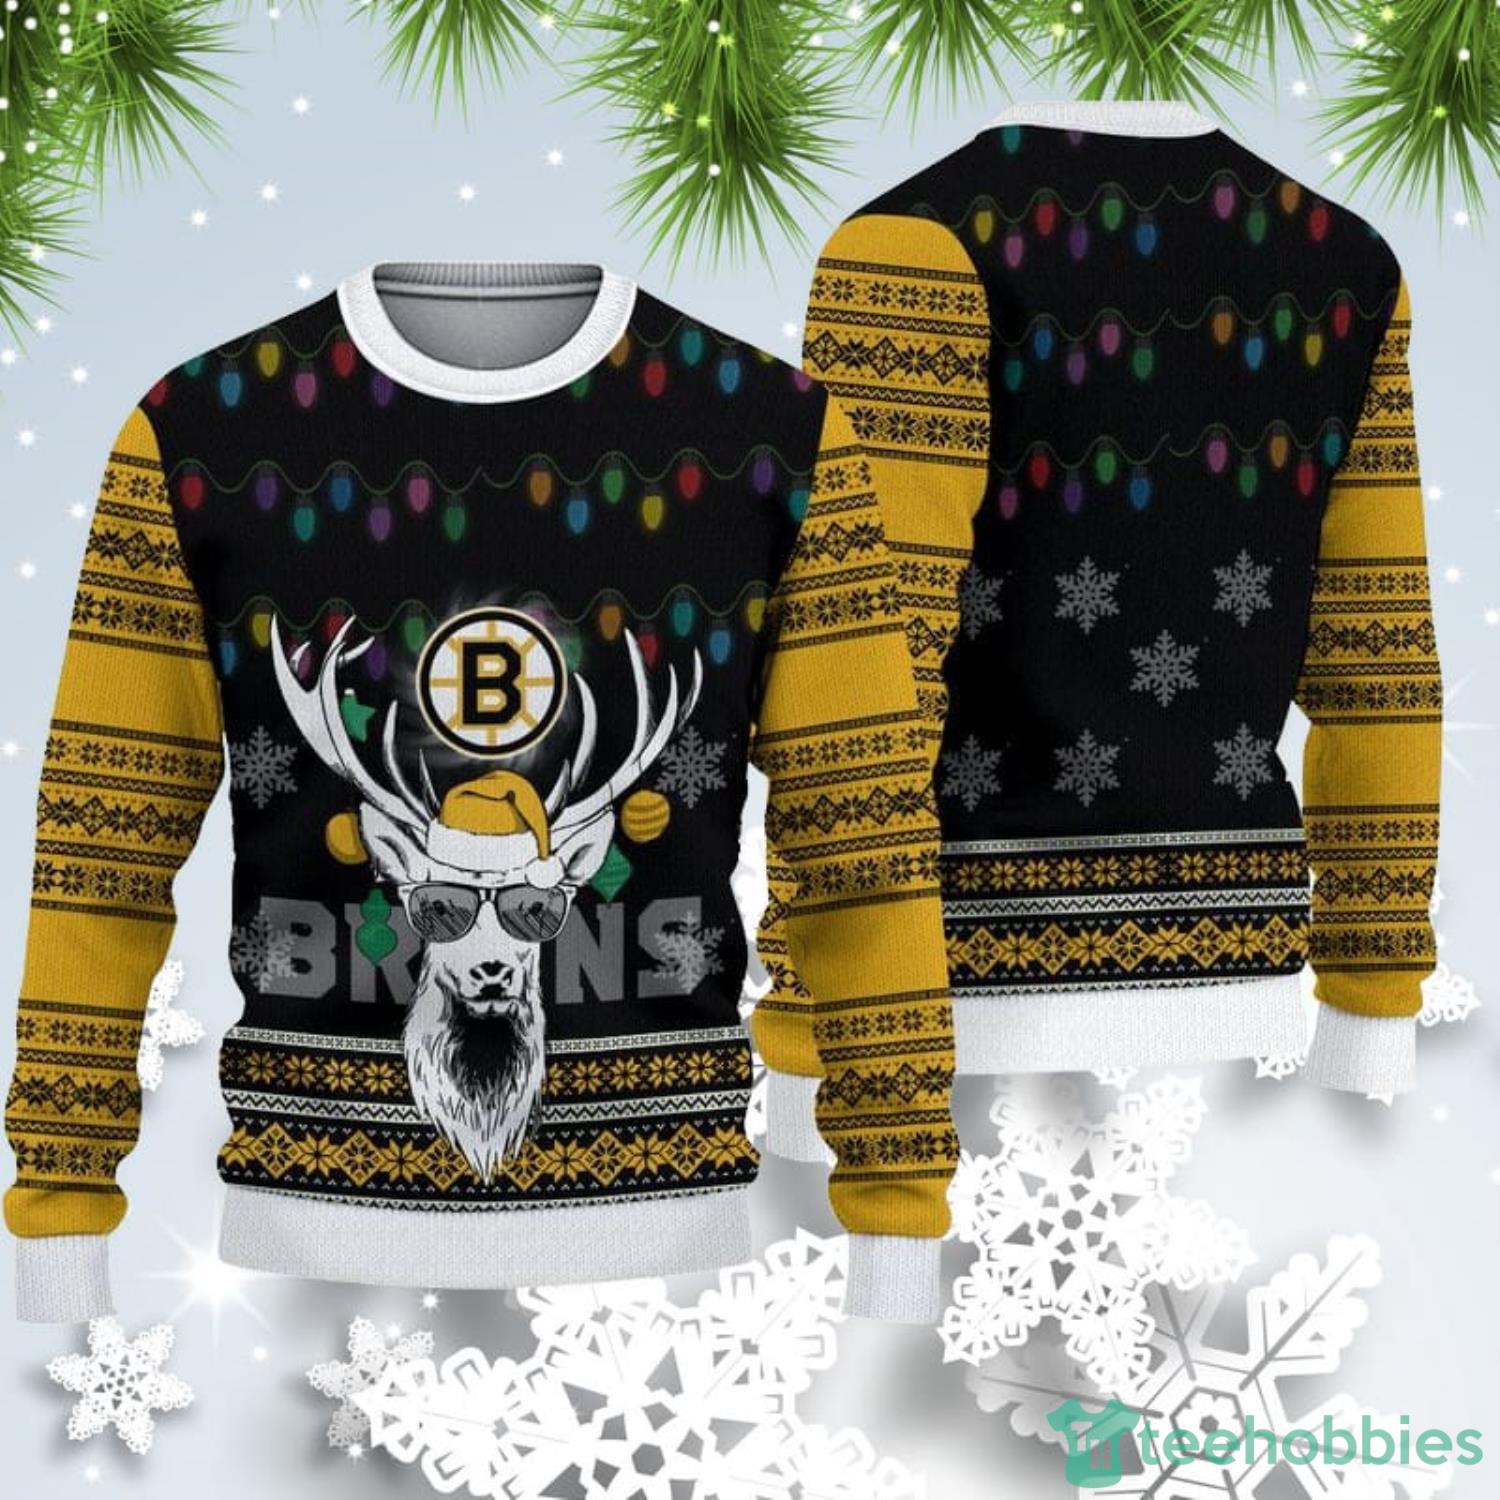 For Fans NHL Boston Bruins Christmas Tree And Gift Ugly Christmas Sweater -  Freedomdesign